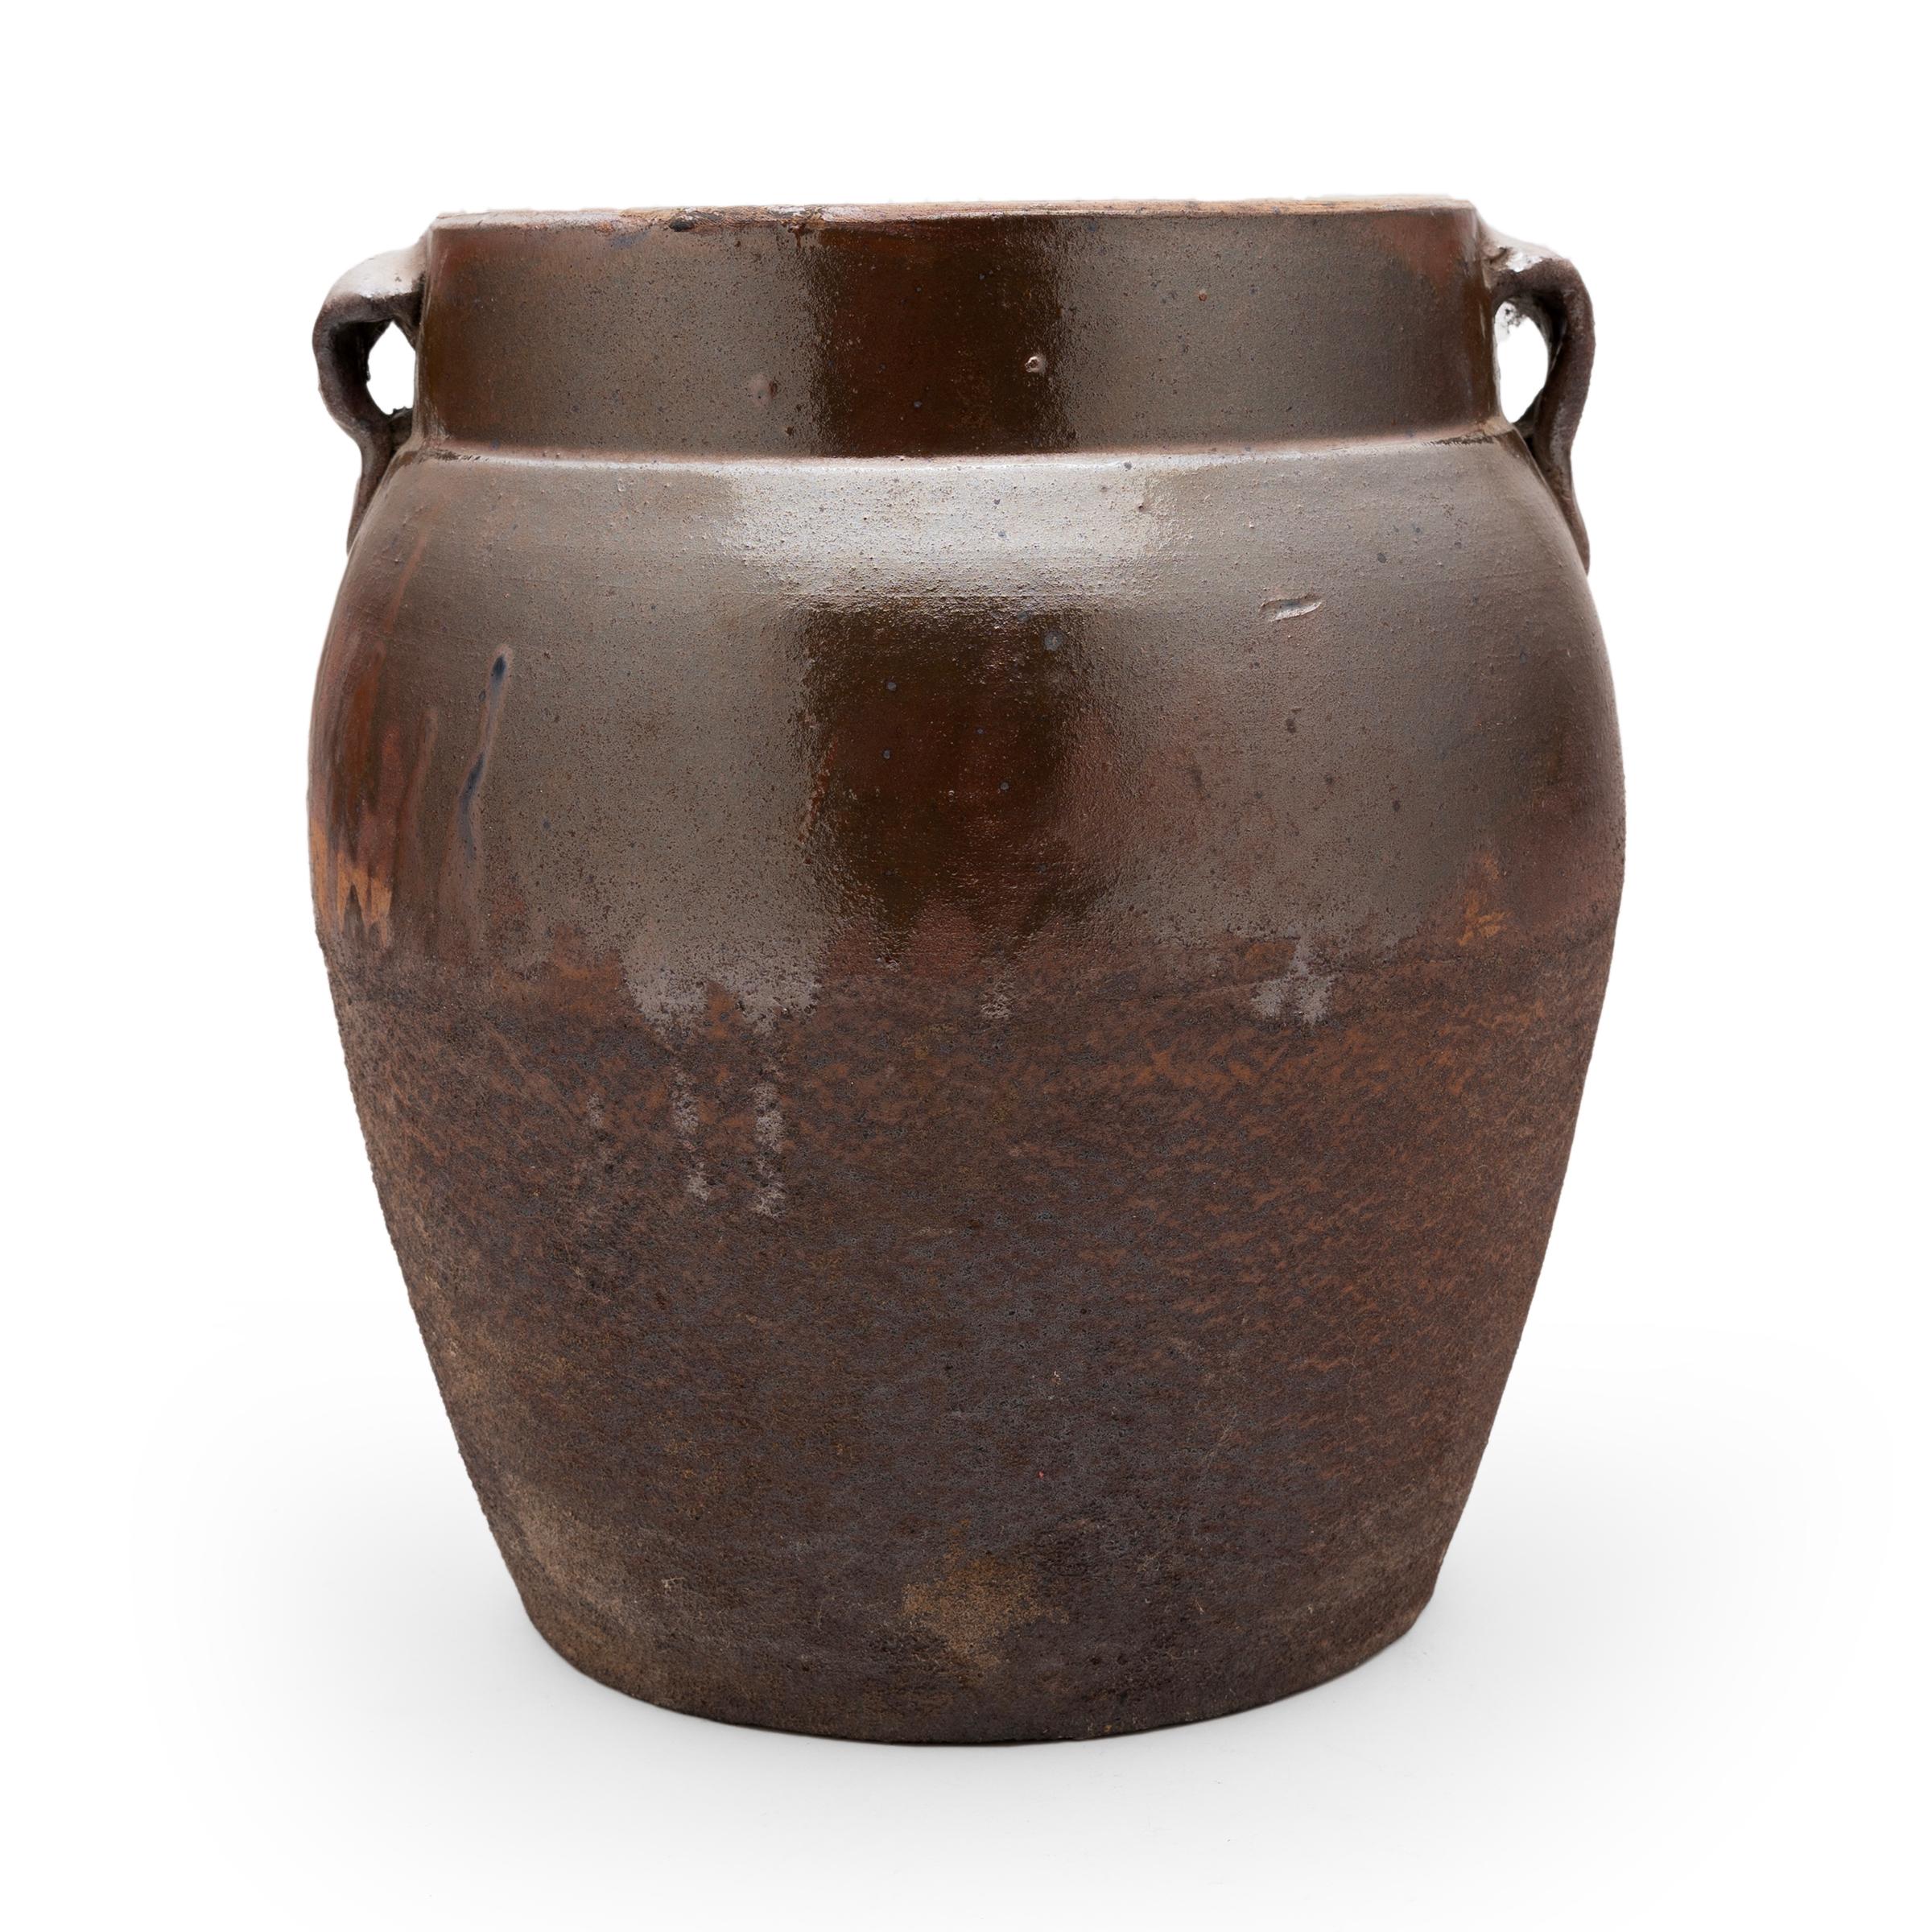 As evidenced by the interior glaze, this wide-mouth jar was once used in a provincial Qing-dynasty kitchen for storing food and condiments. The large vessel has a gently tapered form, with rounded shoulders, small strap handles and a short, straight